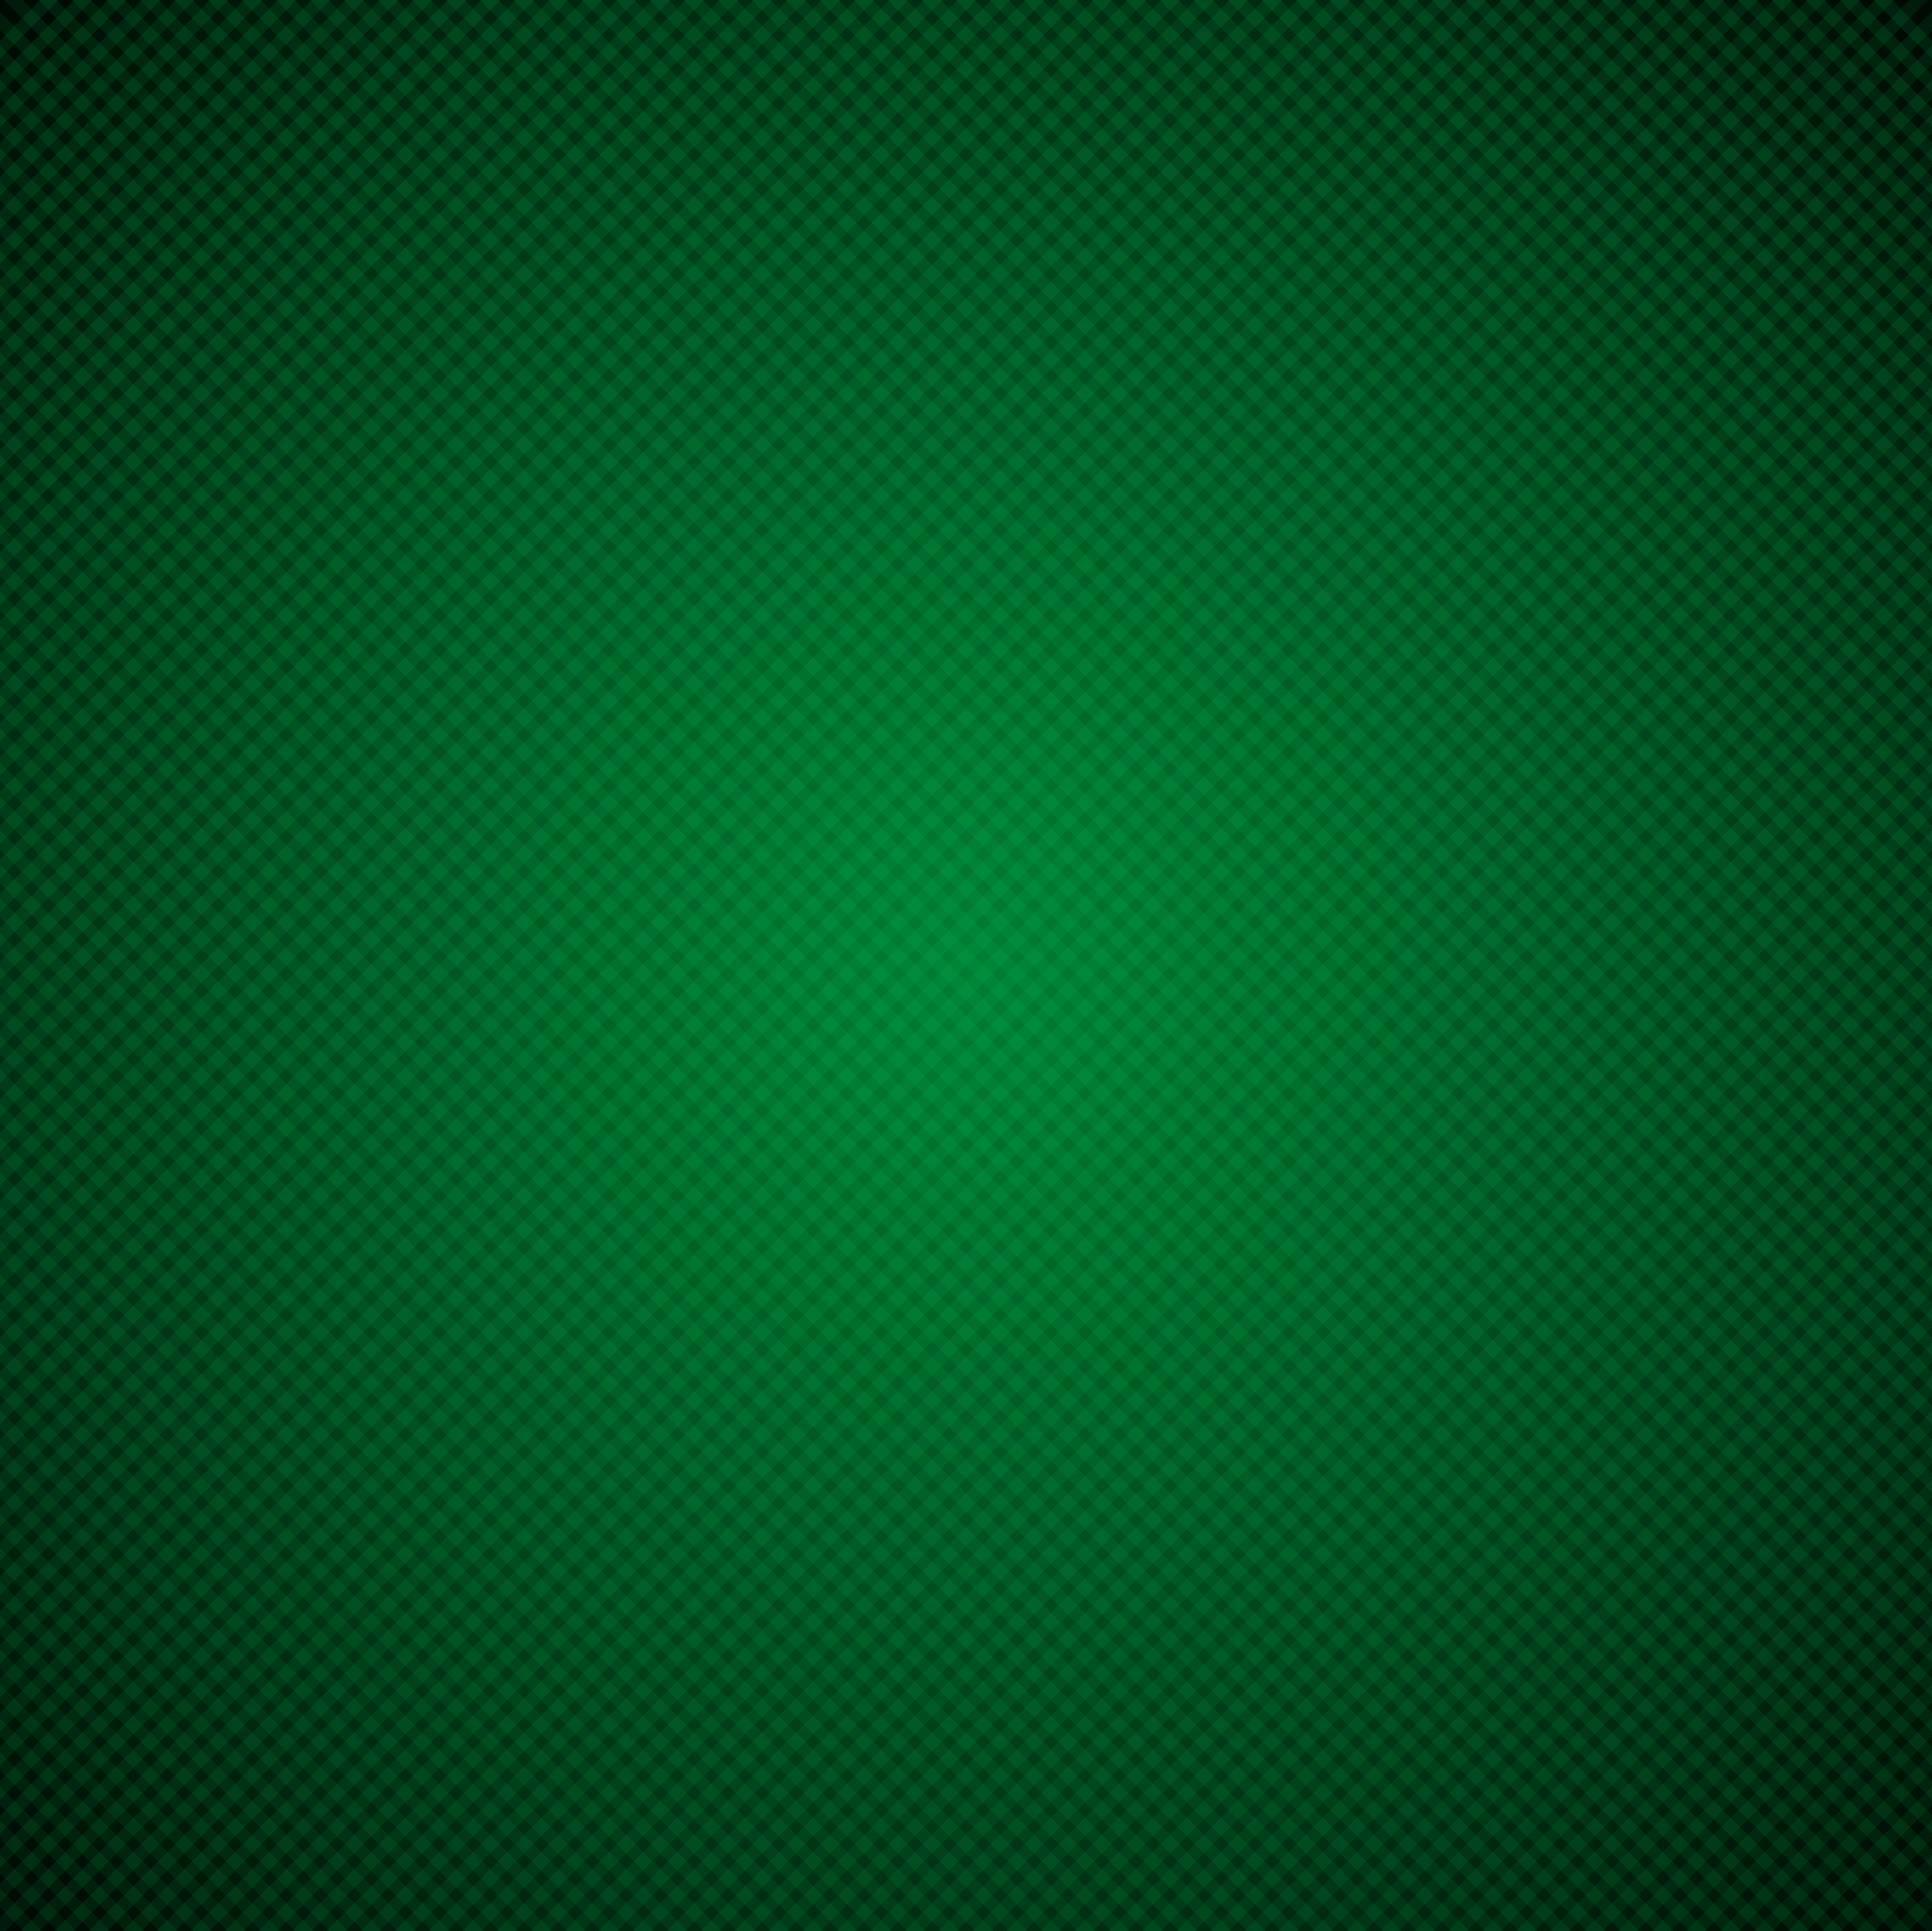 Green Background Quality Image